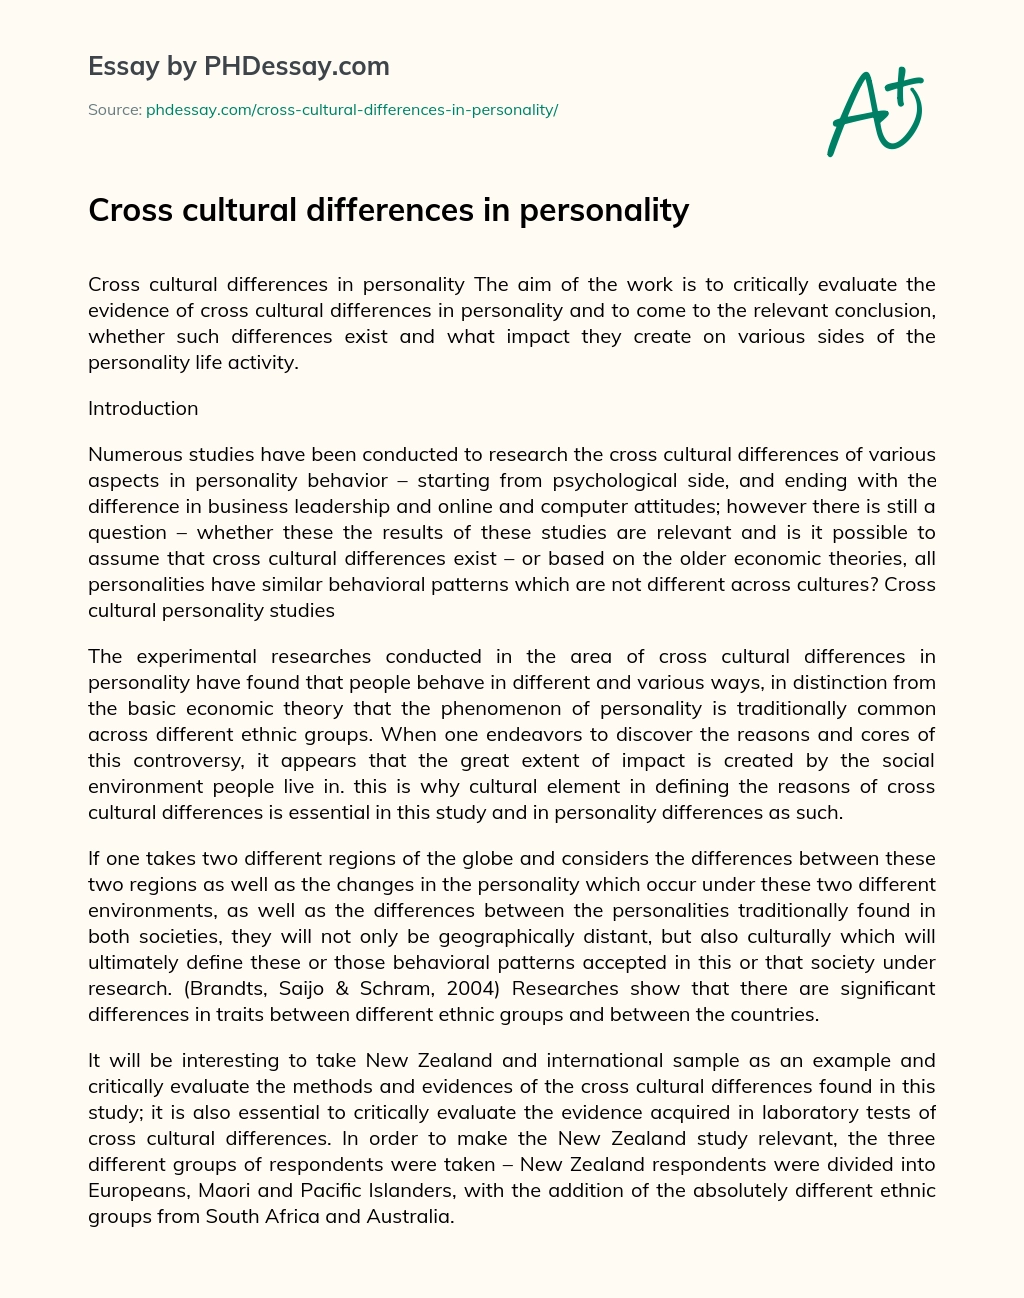 Cross cultural differences in personality essay